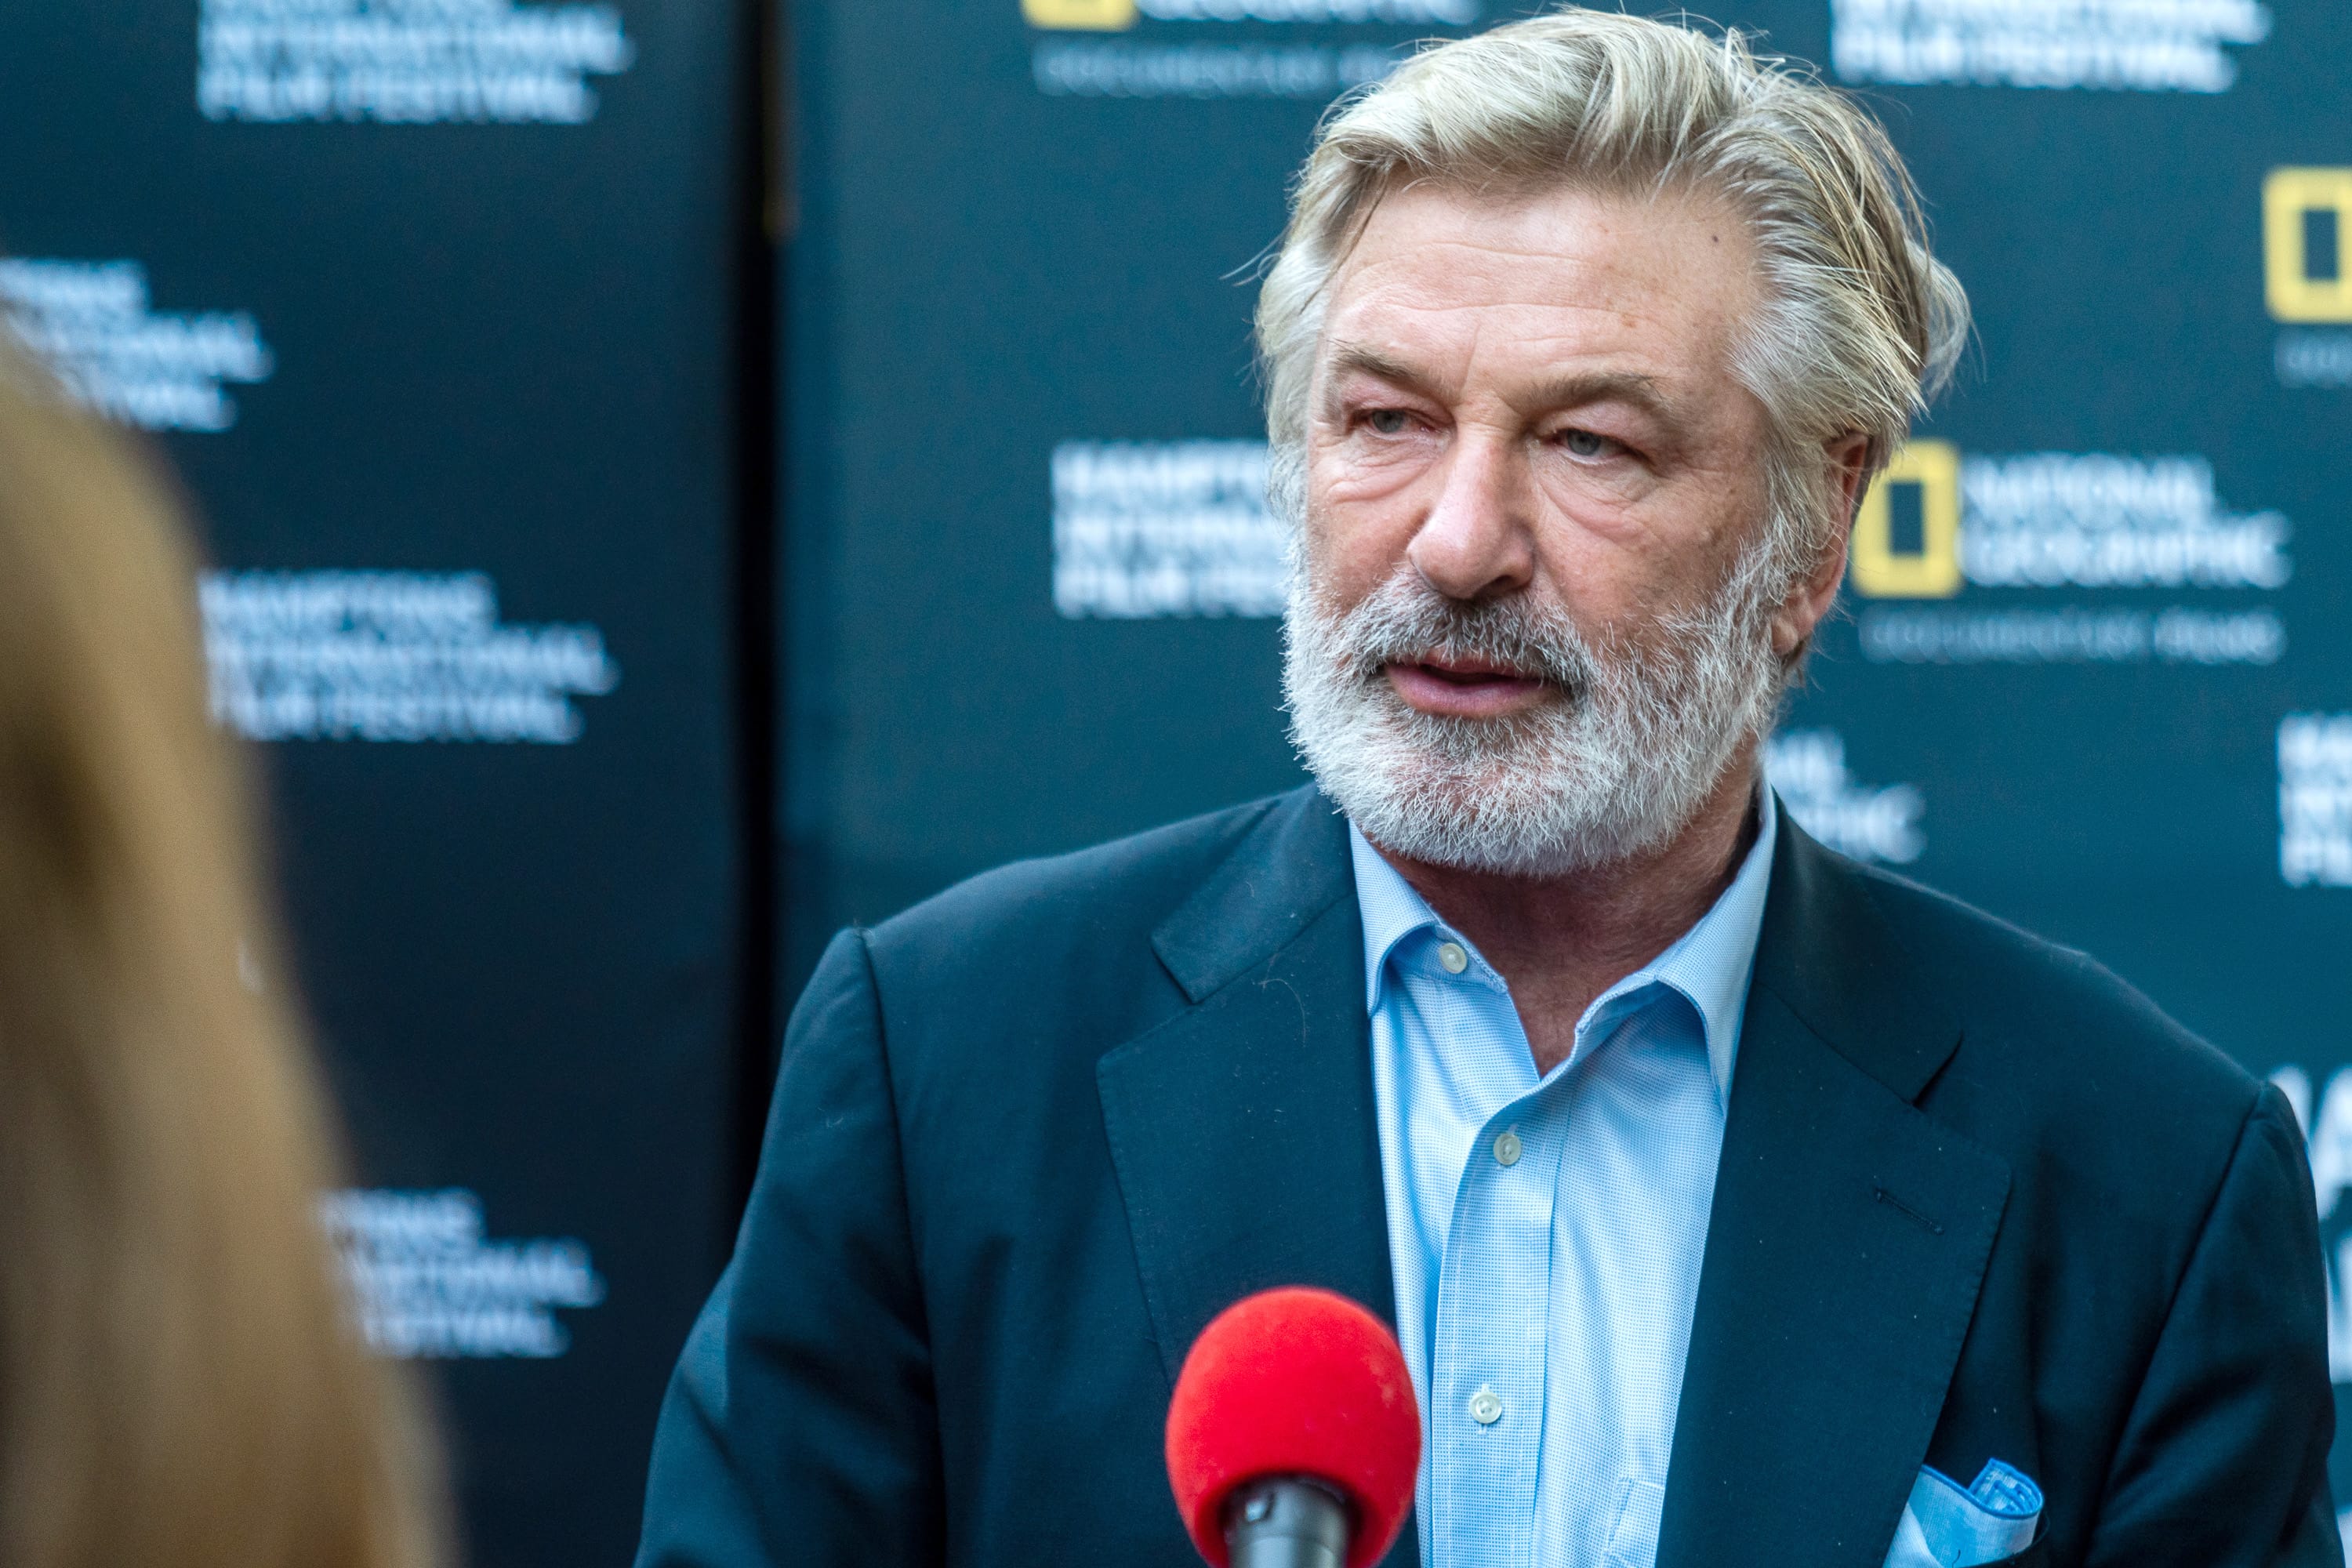 Alec Baldwin says he did not pull the trigger before the bullet struck killed ‘Rust’ cinematographer – CNBC